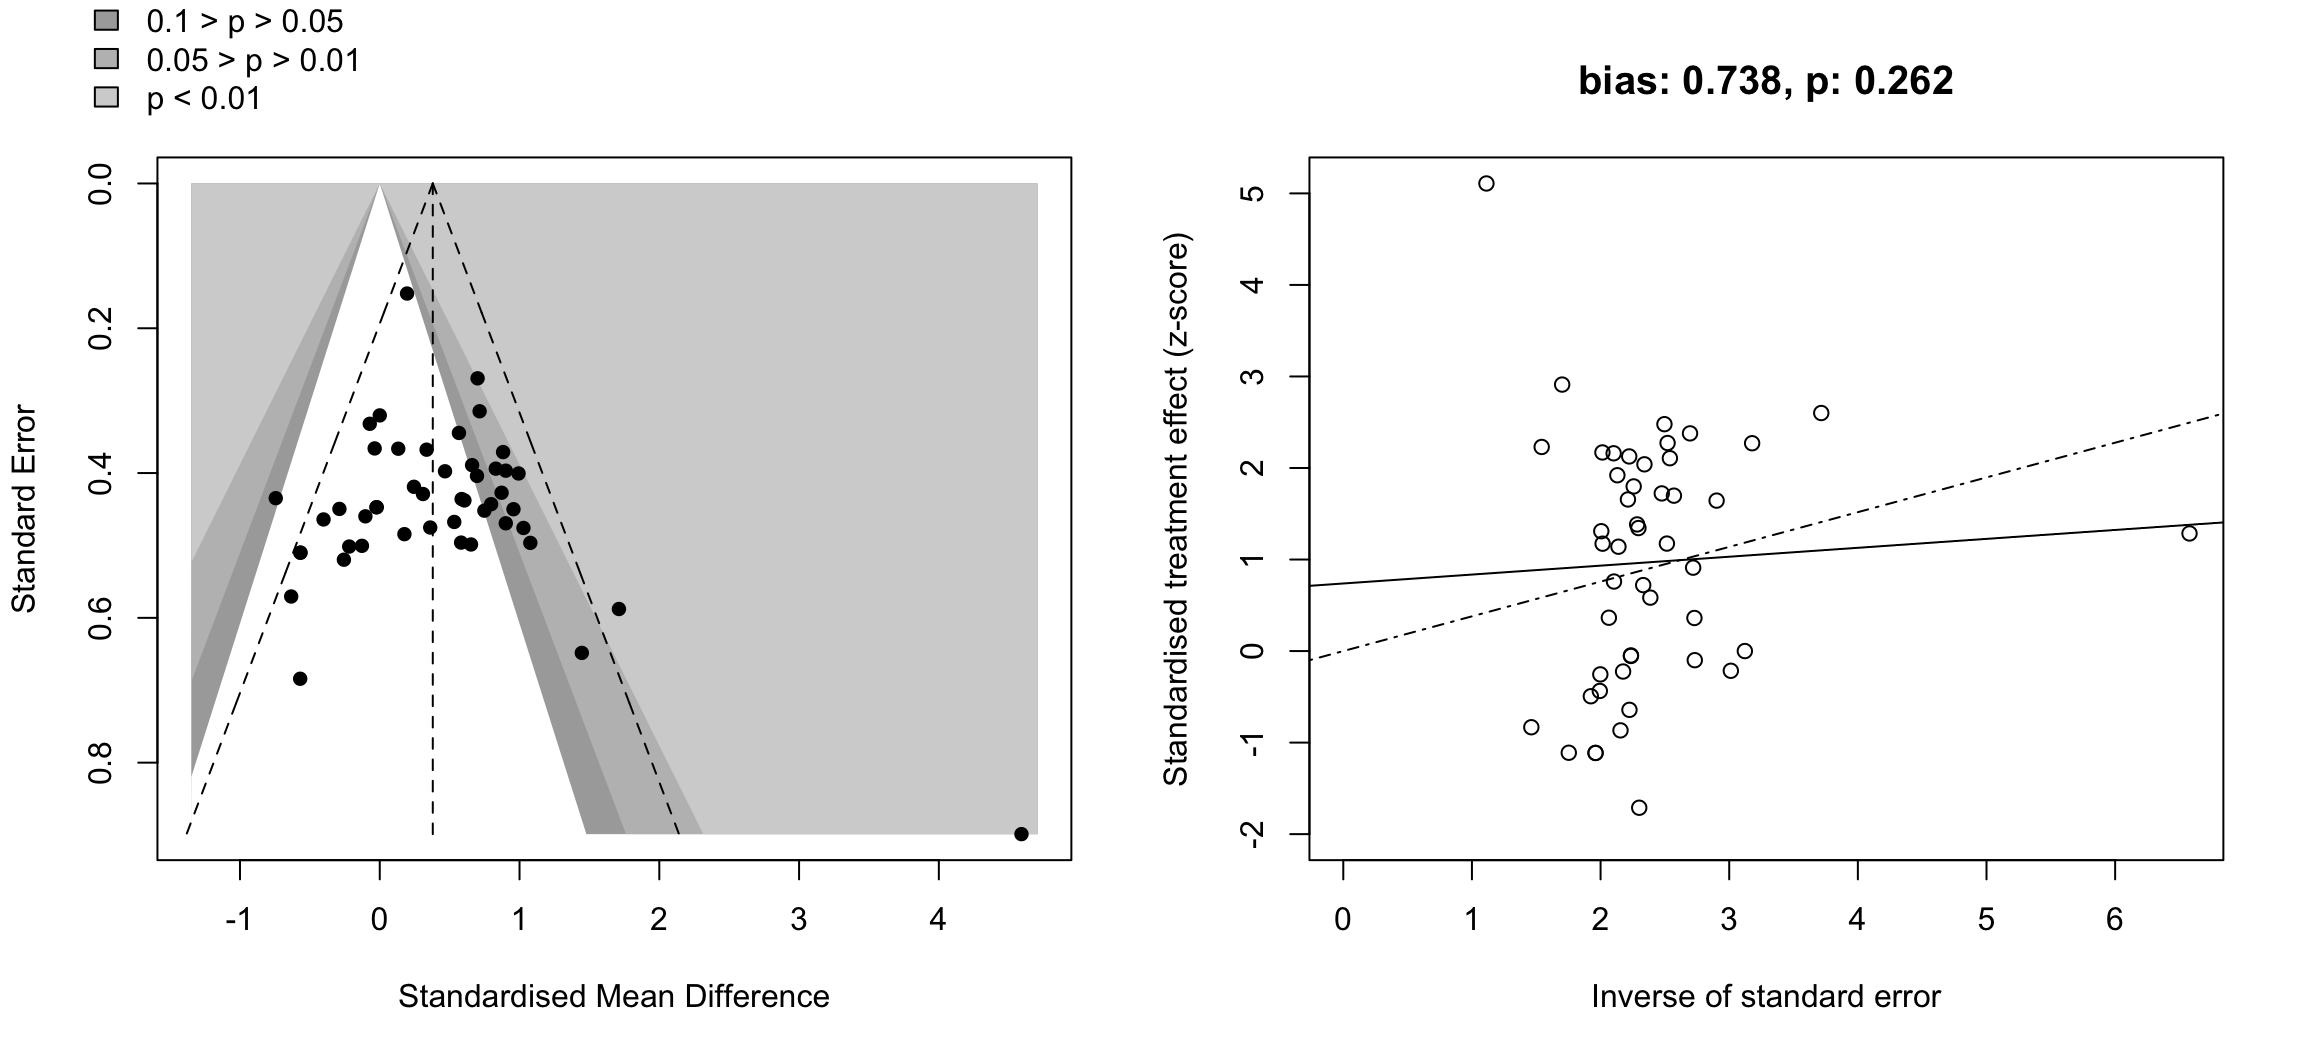 Left panel shows the contour-enhanced funnel plot for the meta-analysis. The shaded areas represent the p-value: light gray p < 0.01, gray 0.05 > p > 0.01, dark gray 0.1 > p > 0.05. The standard error of each study is plotted as a function of the effect size (Cohen’s d). Negative and positive x-axis values represent a favorable effect for MICT and HIIE, respectively. Right panel shows the radial plot, with the standardized treatment effect (z-score) plotted as a function of the inverse of the standard error. The dashed line represents the regression line, and the continuous line represents the regression line from the Egger Test.